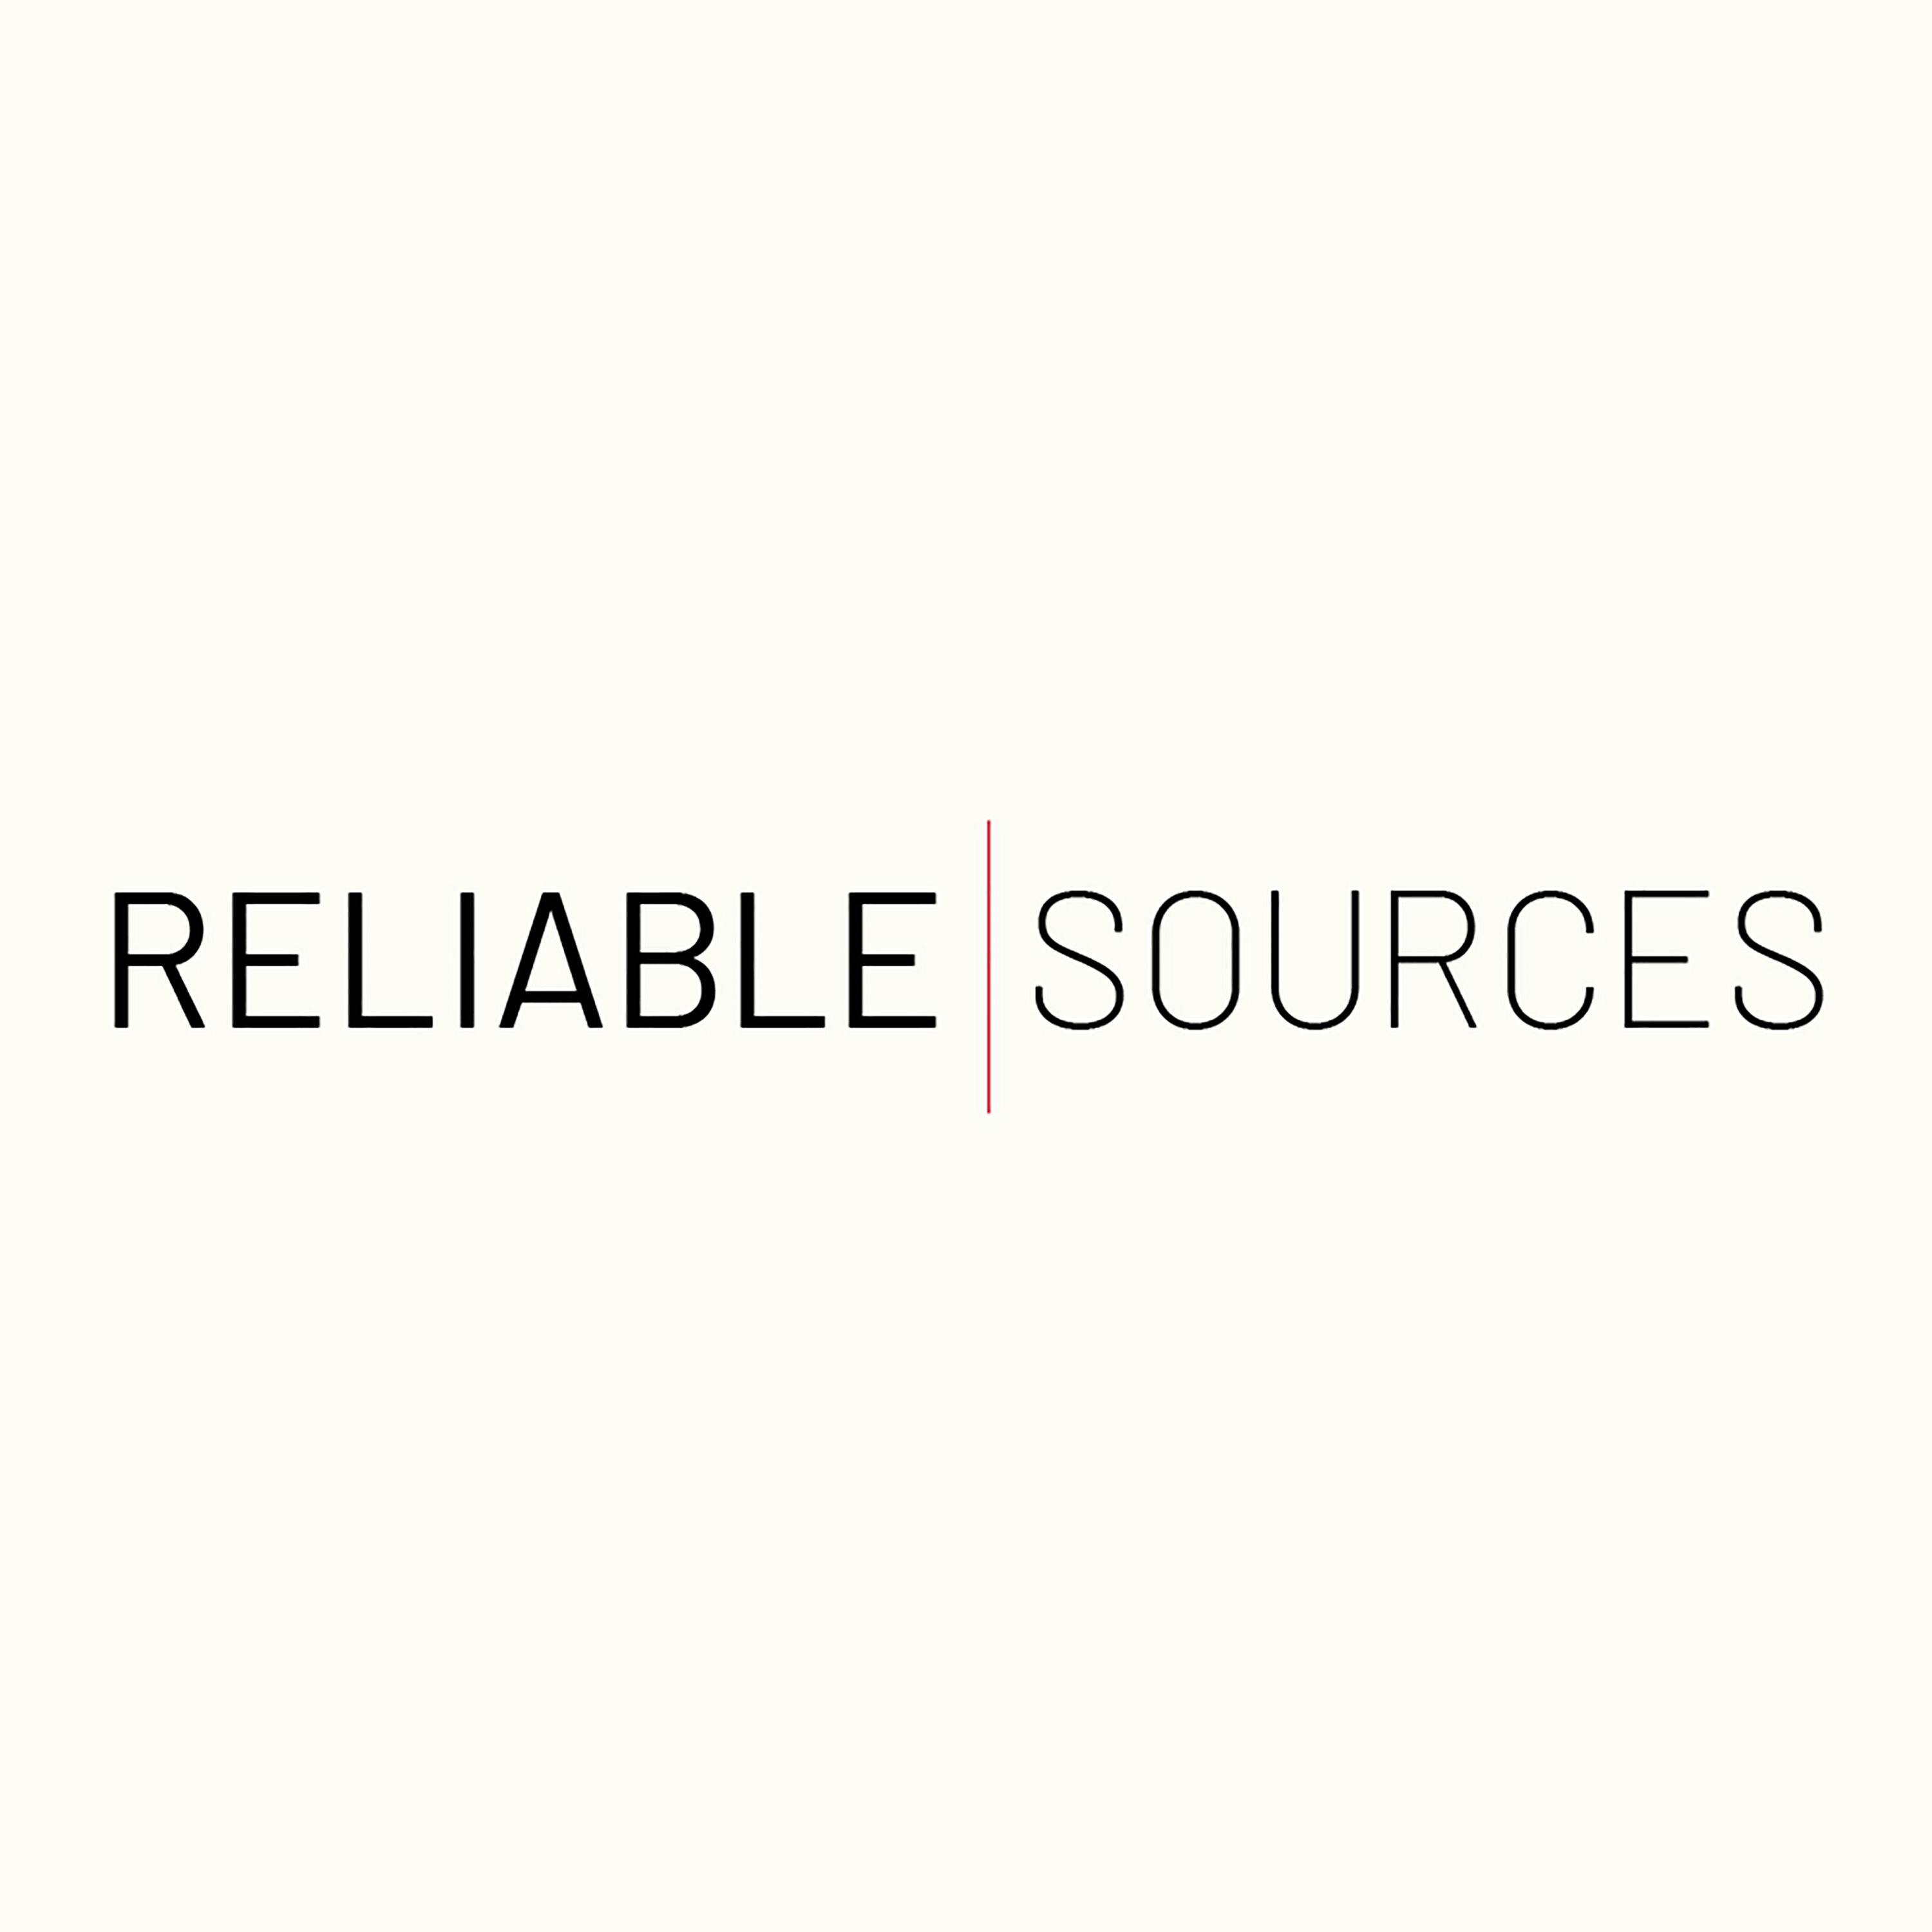 Media leaders convene for final episode of 'Reliable Sources' TV show